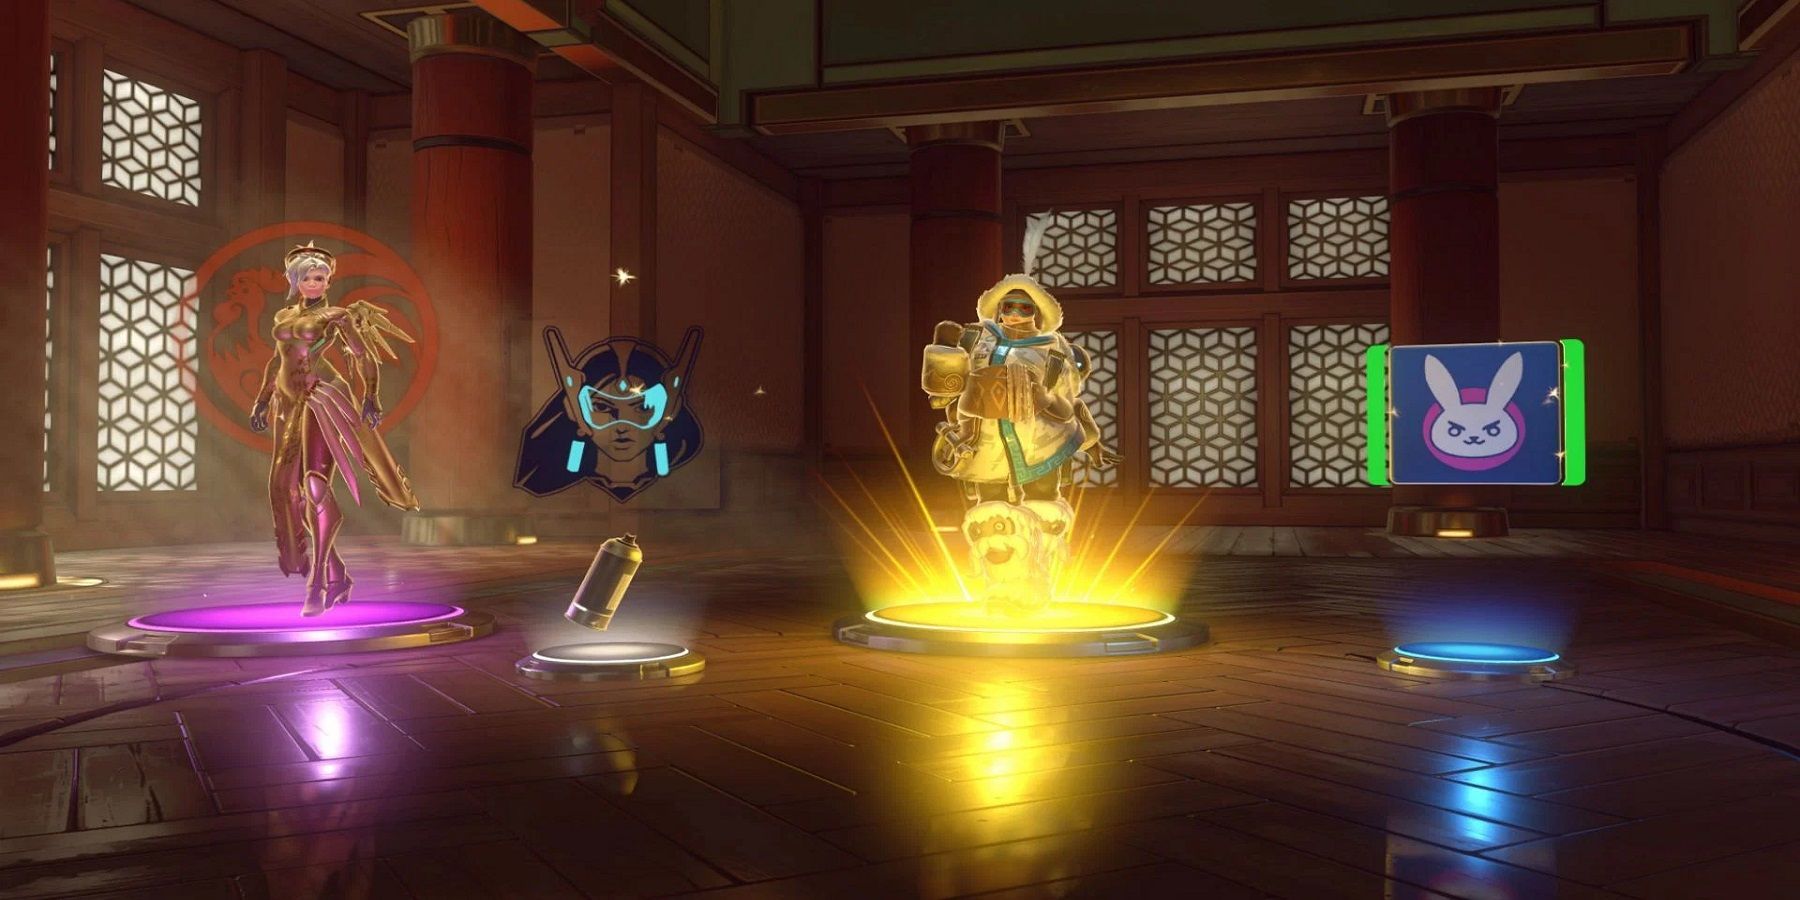 An Overwatch 2 player suggests bringing back loot boxes in response to the current microtransaction system.